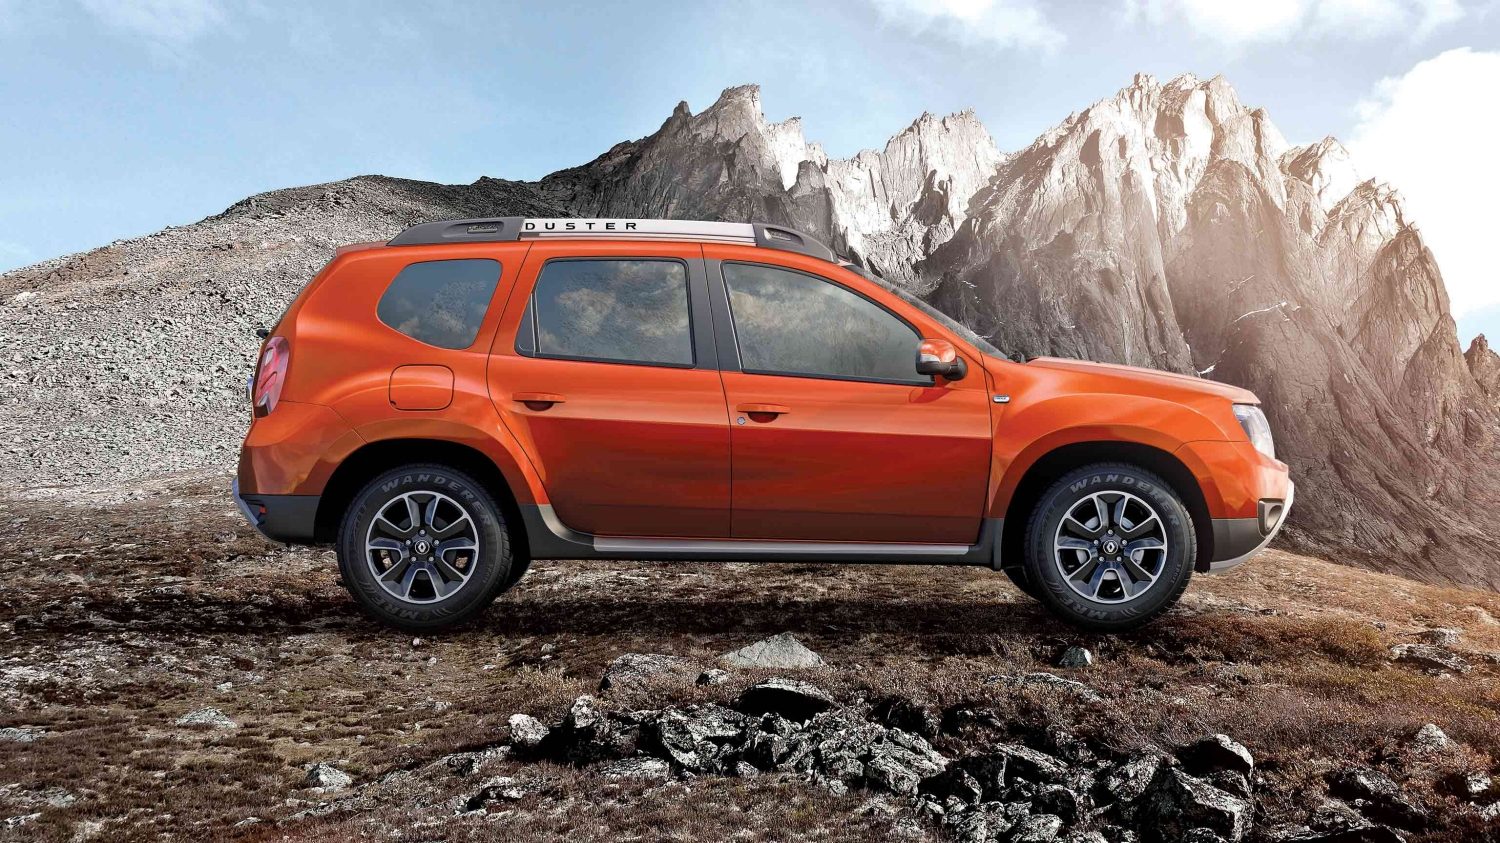 New Renault Duster 2017